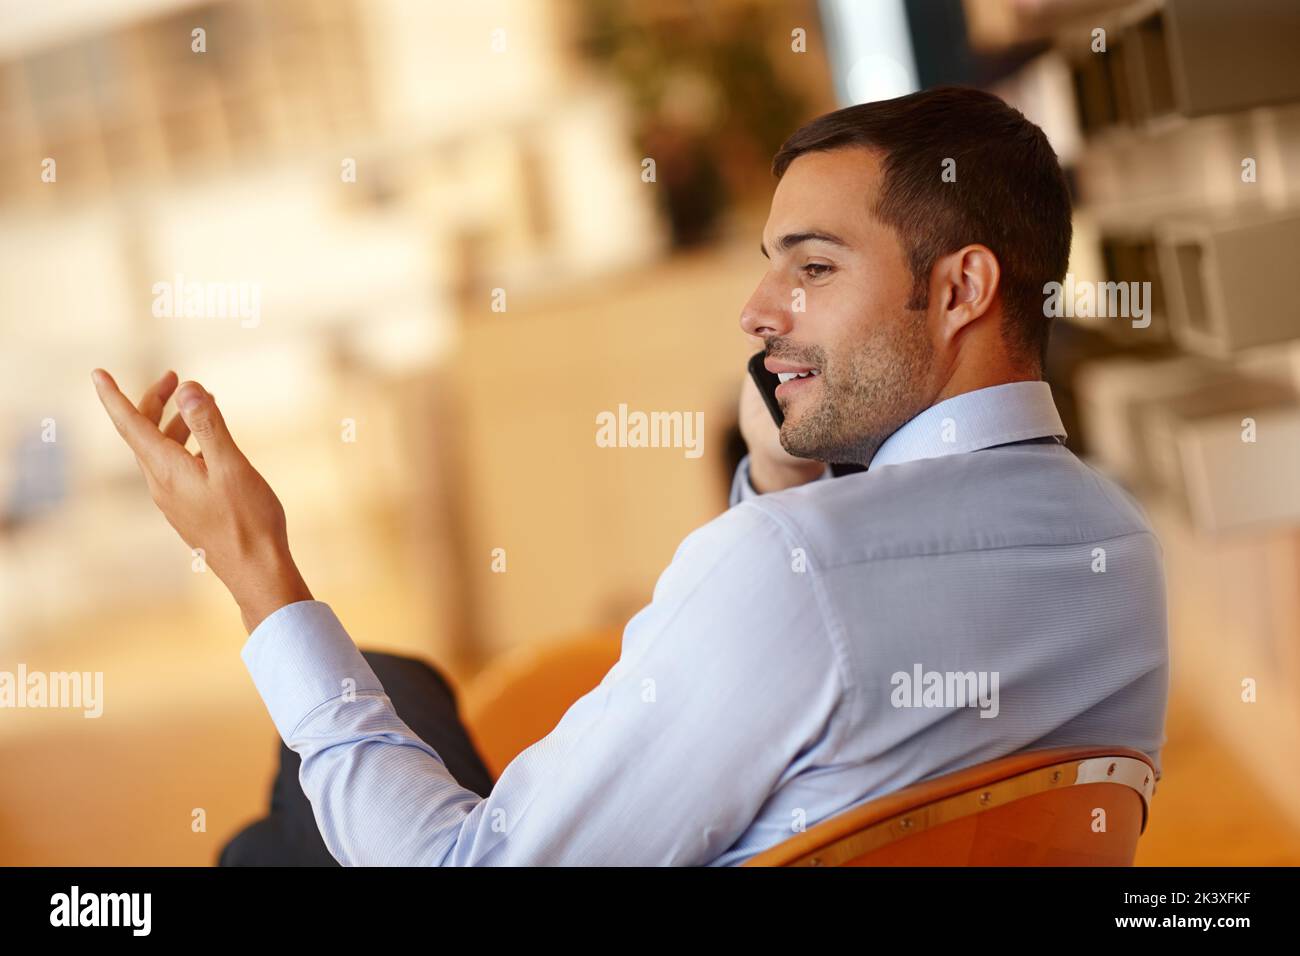 Let me explain the terms once more...A handsome young businessman making use of his smartphone. Stock Photo